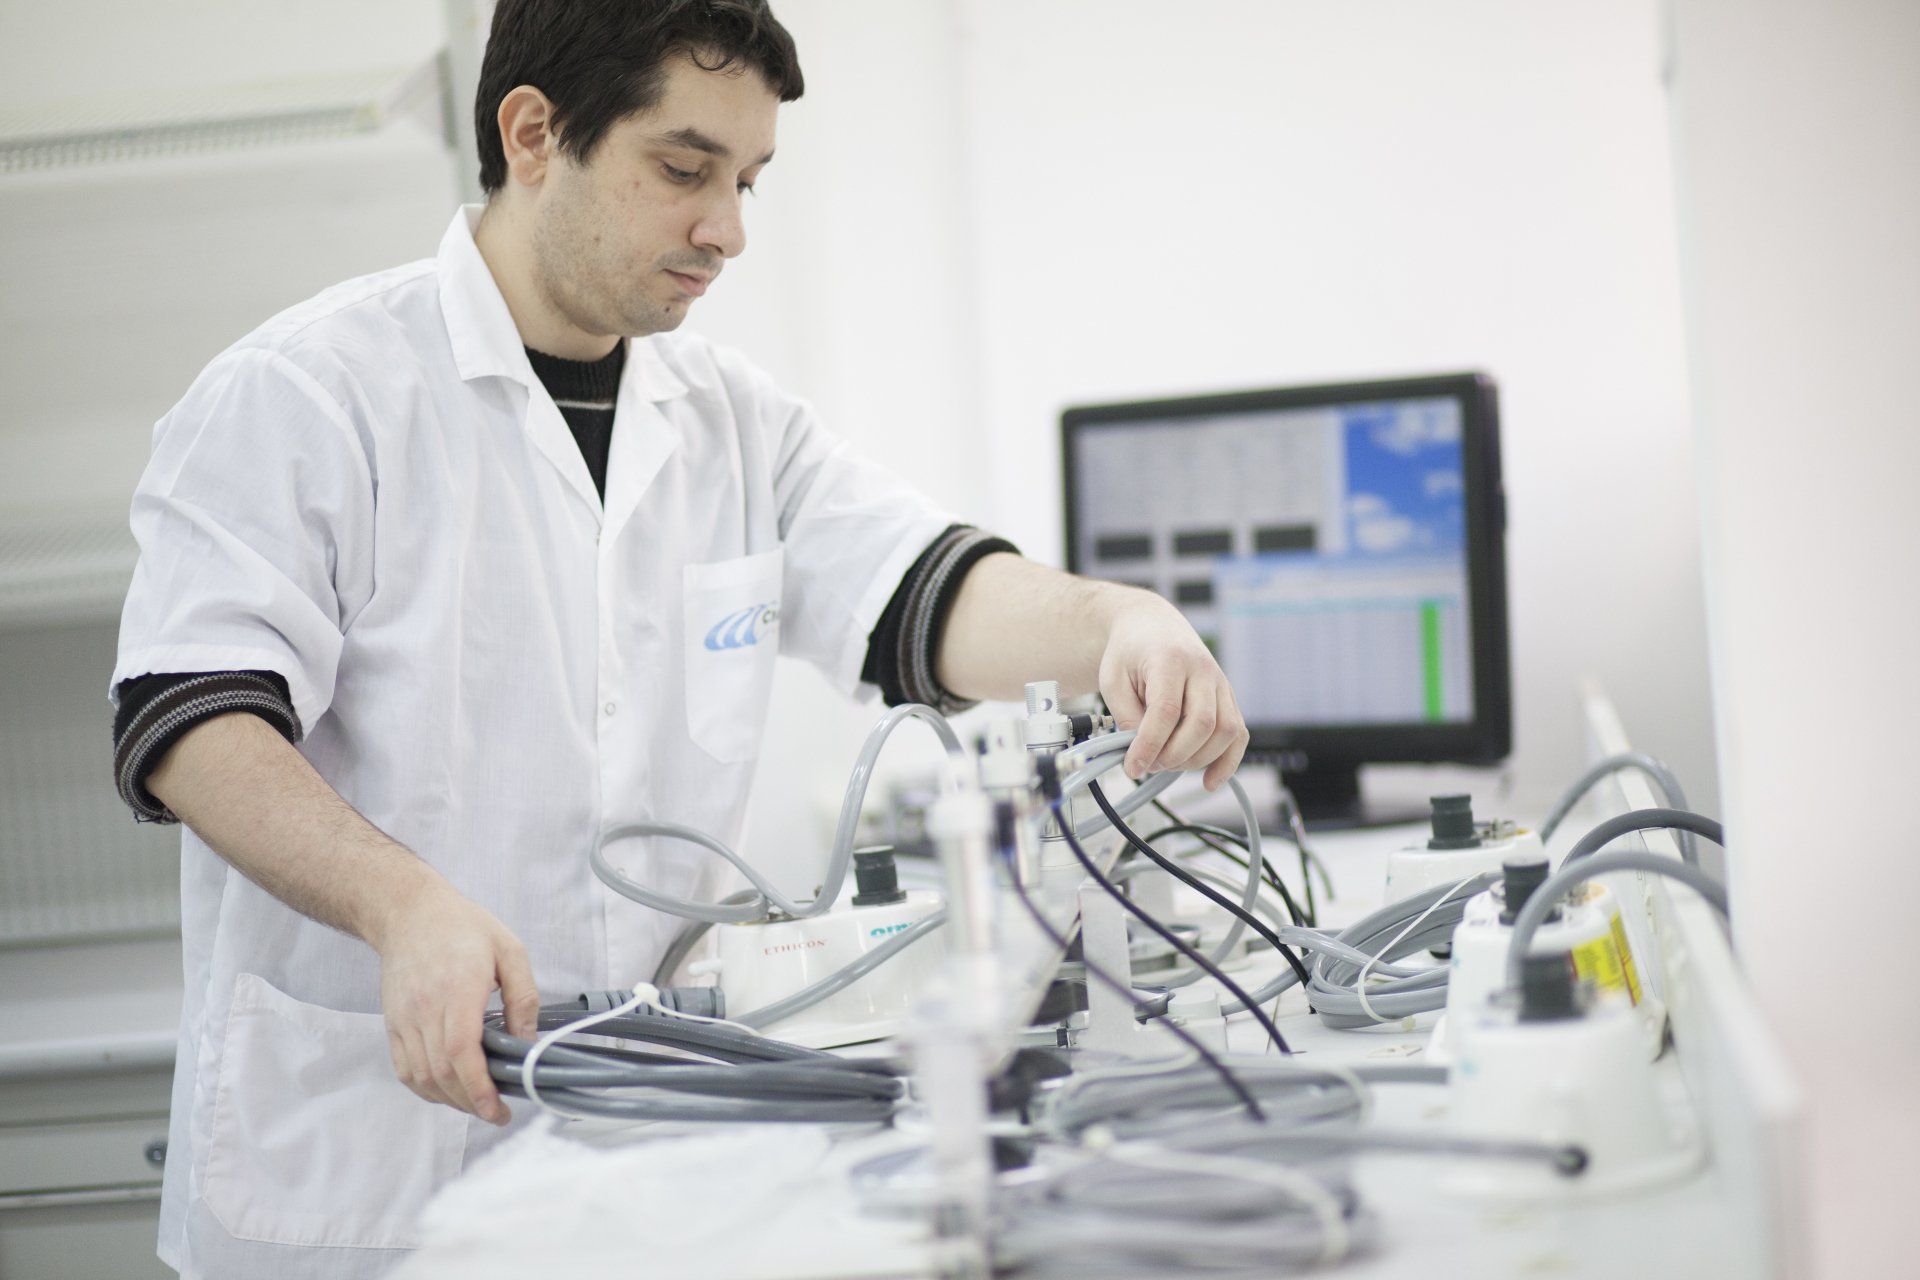 Medical device production service with Chaban Medical testing lab for medical devices